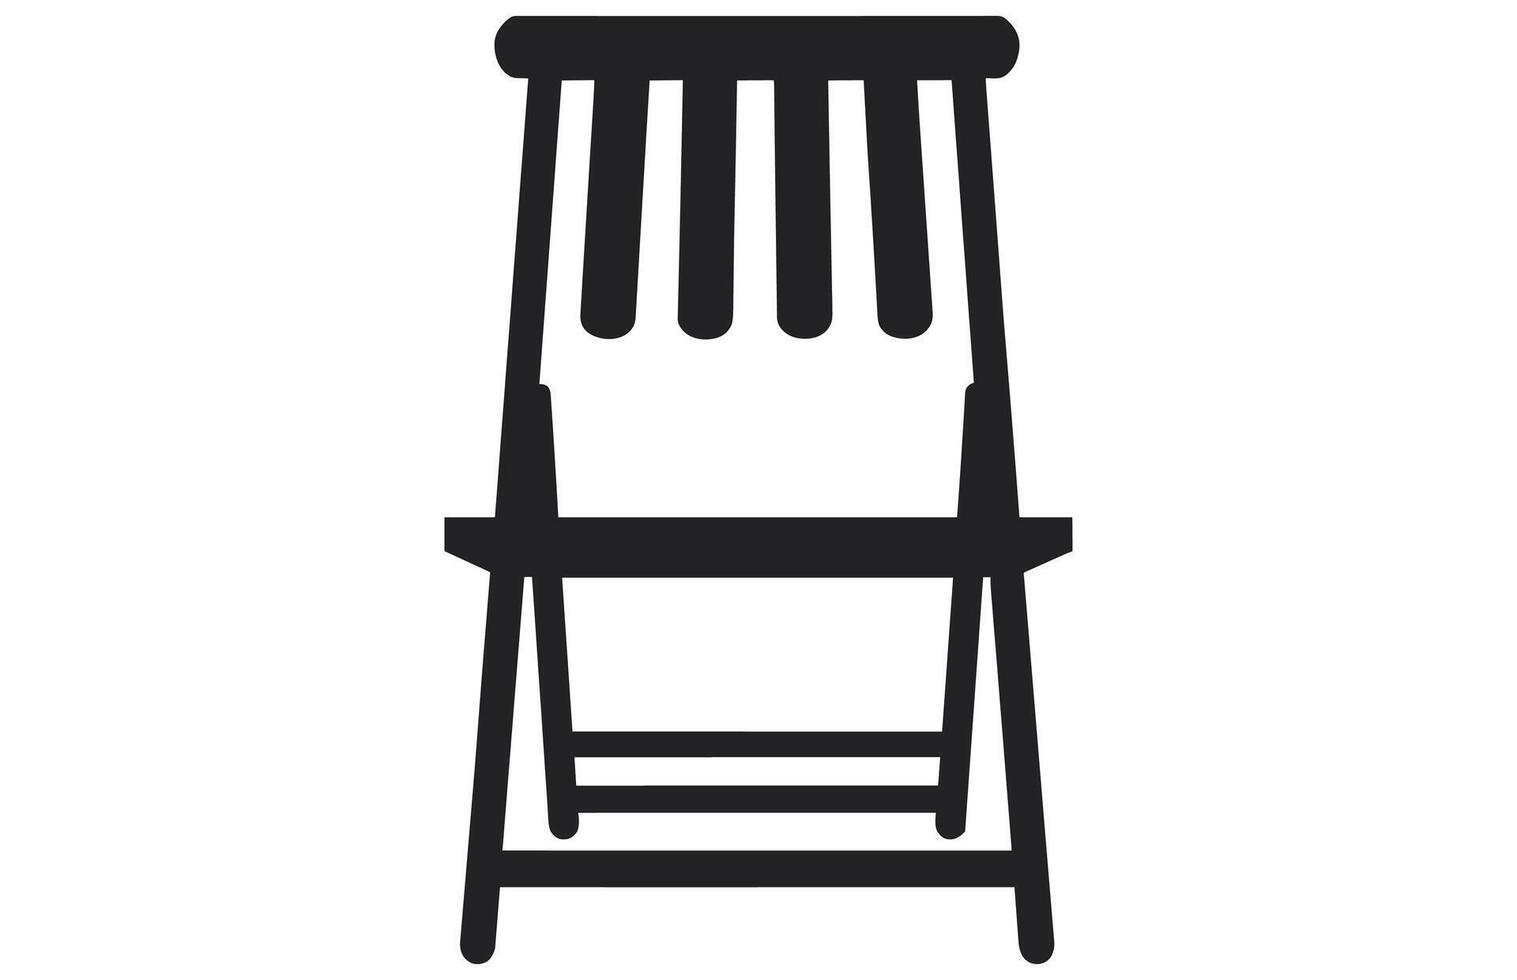 Folding Chair silhouette,Folding chair vector illustration.Chairs Vector Silhouette